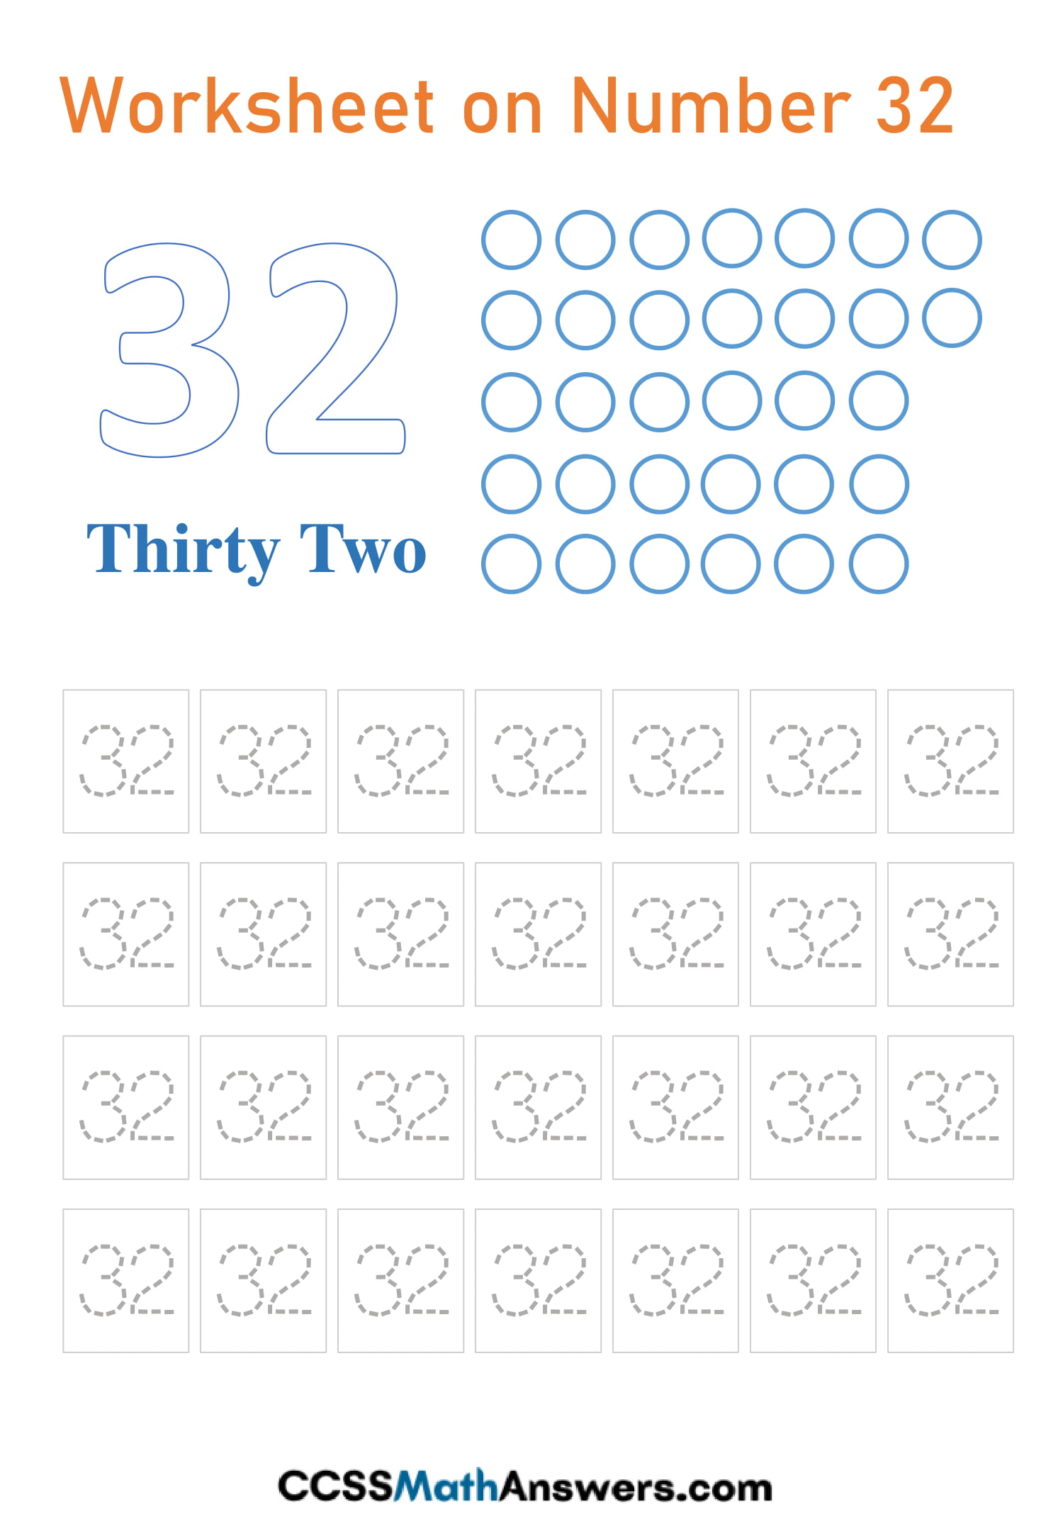 Worksheet on Number 32 | Number 32 Tracing, Counting, Identification